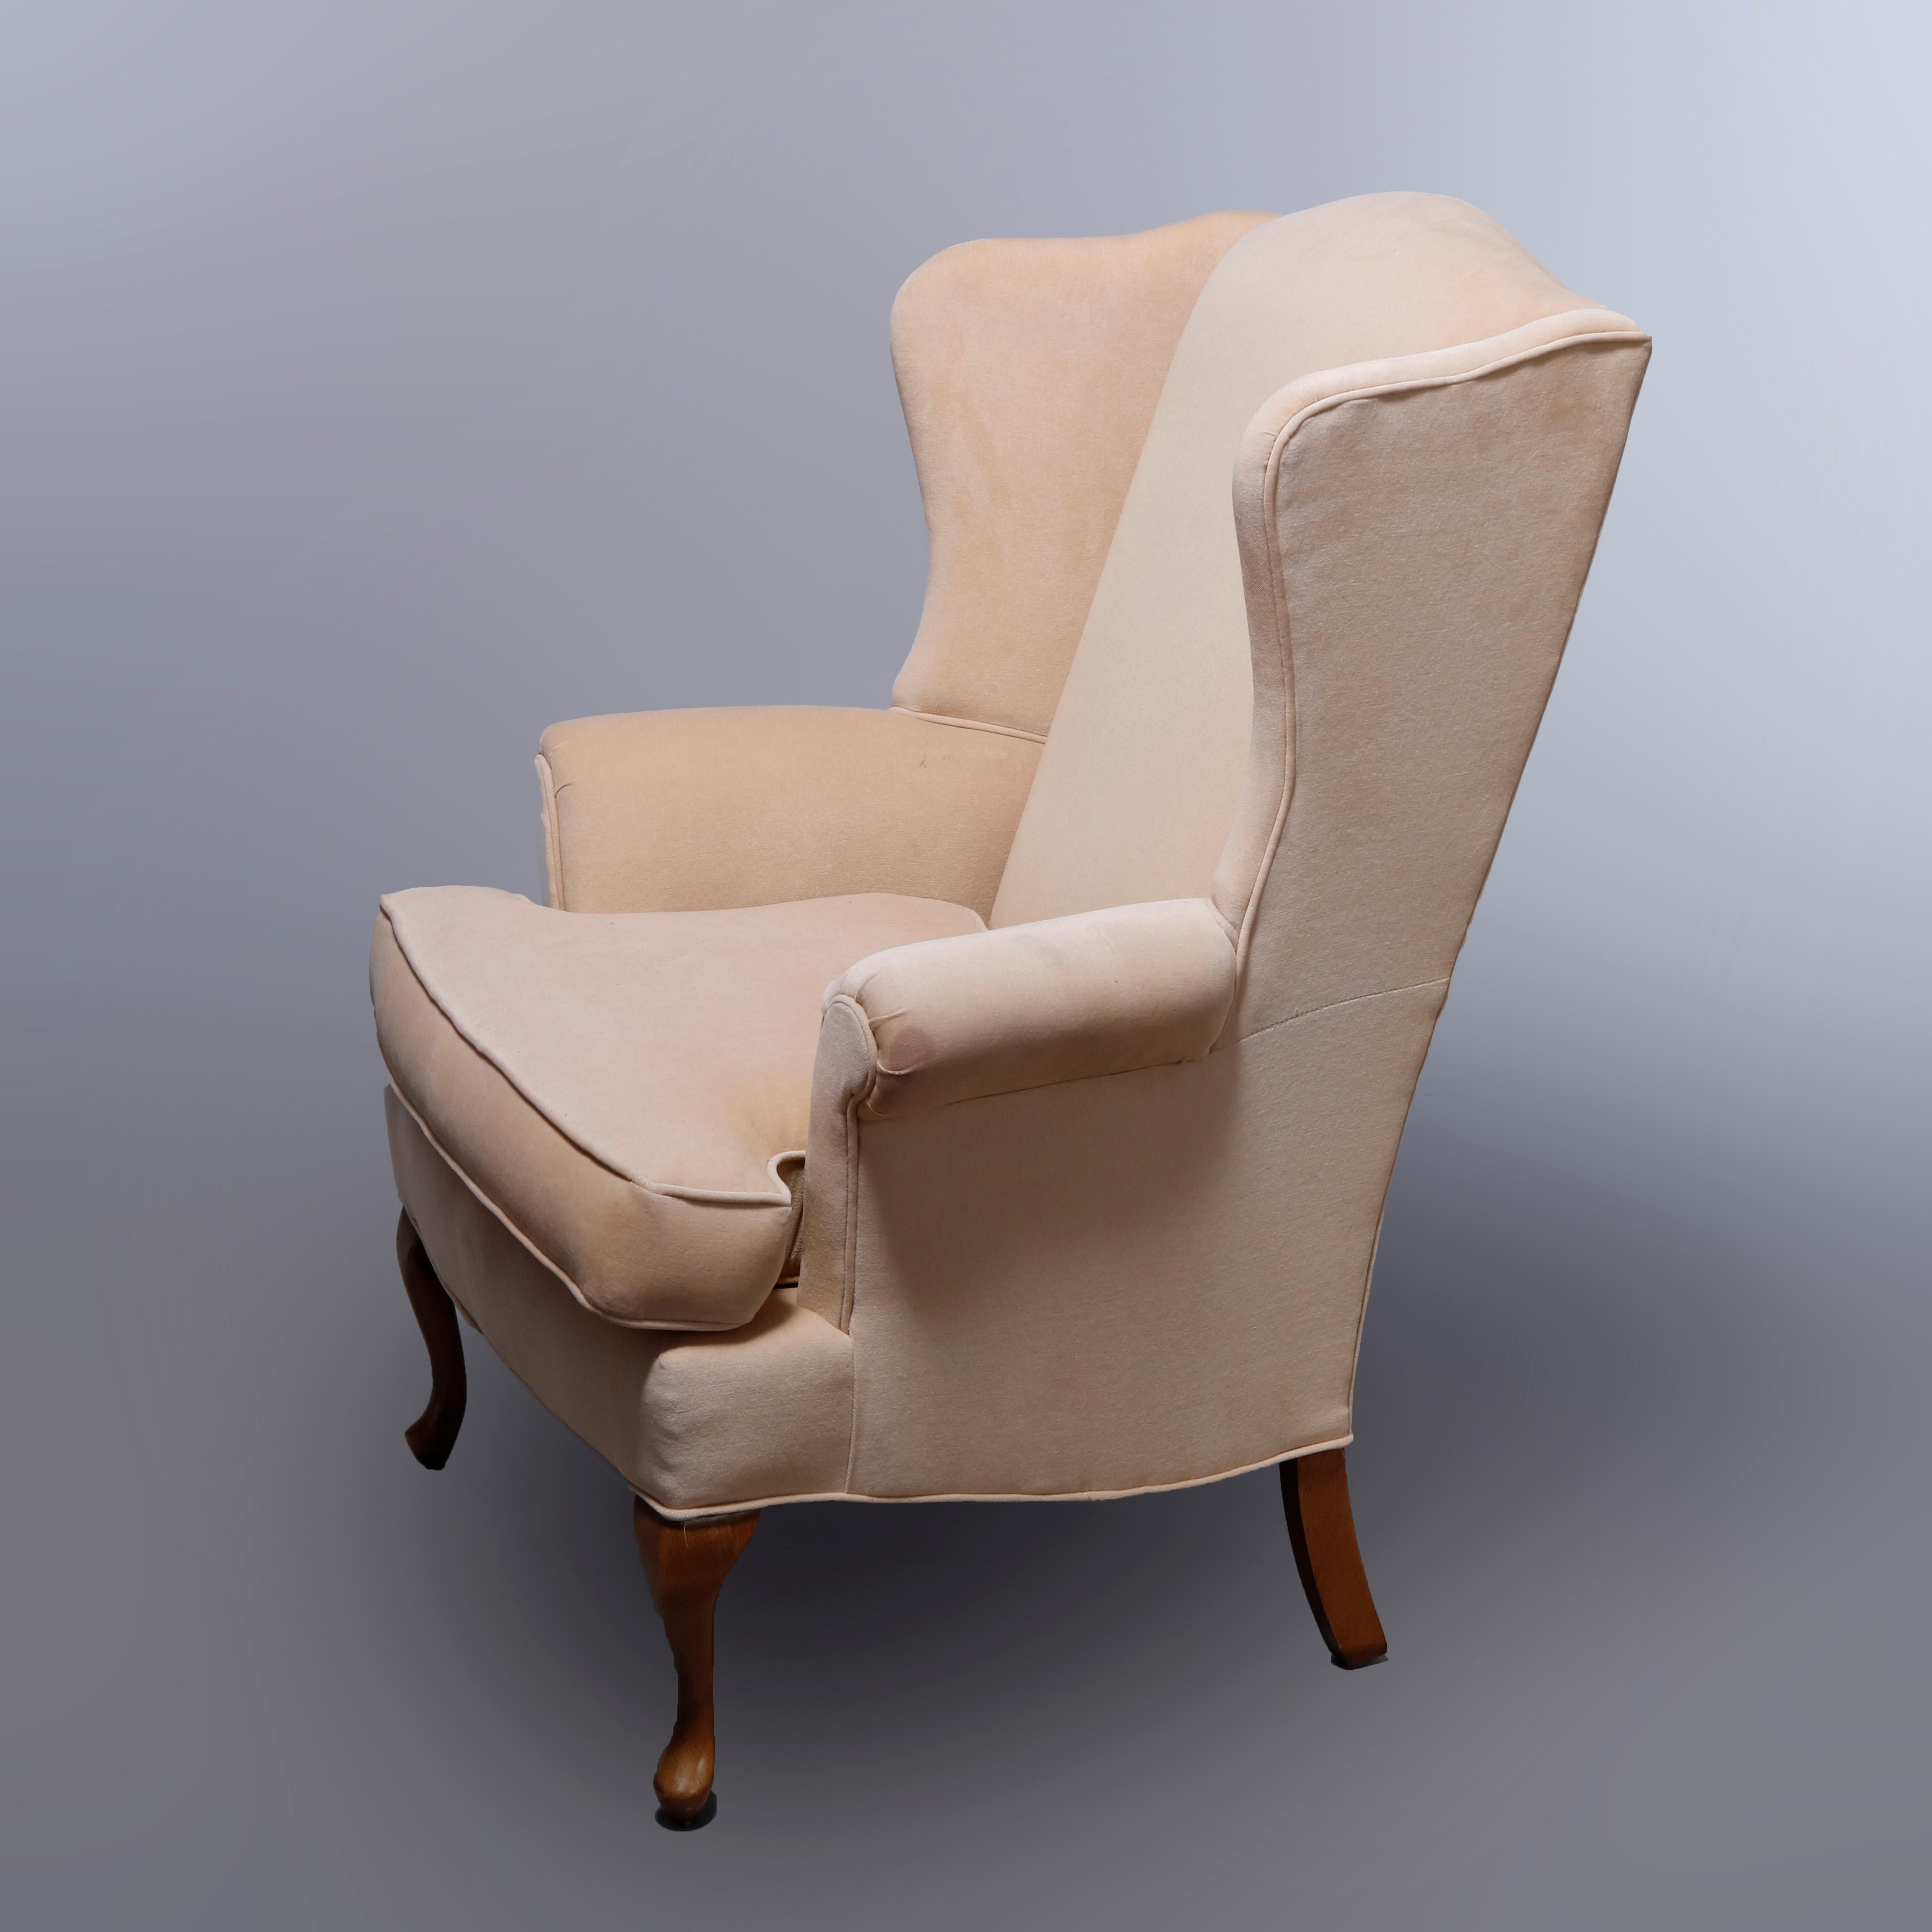 A pair of Queen Anne style fireside wingback chairs by Pennsylvania House offer shaped back and scroll arms raised on mahogany cabriole legs, label as photographed, 20th century.

Measures: 42